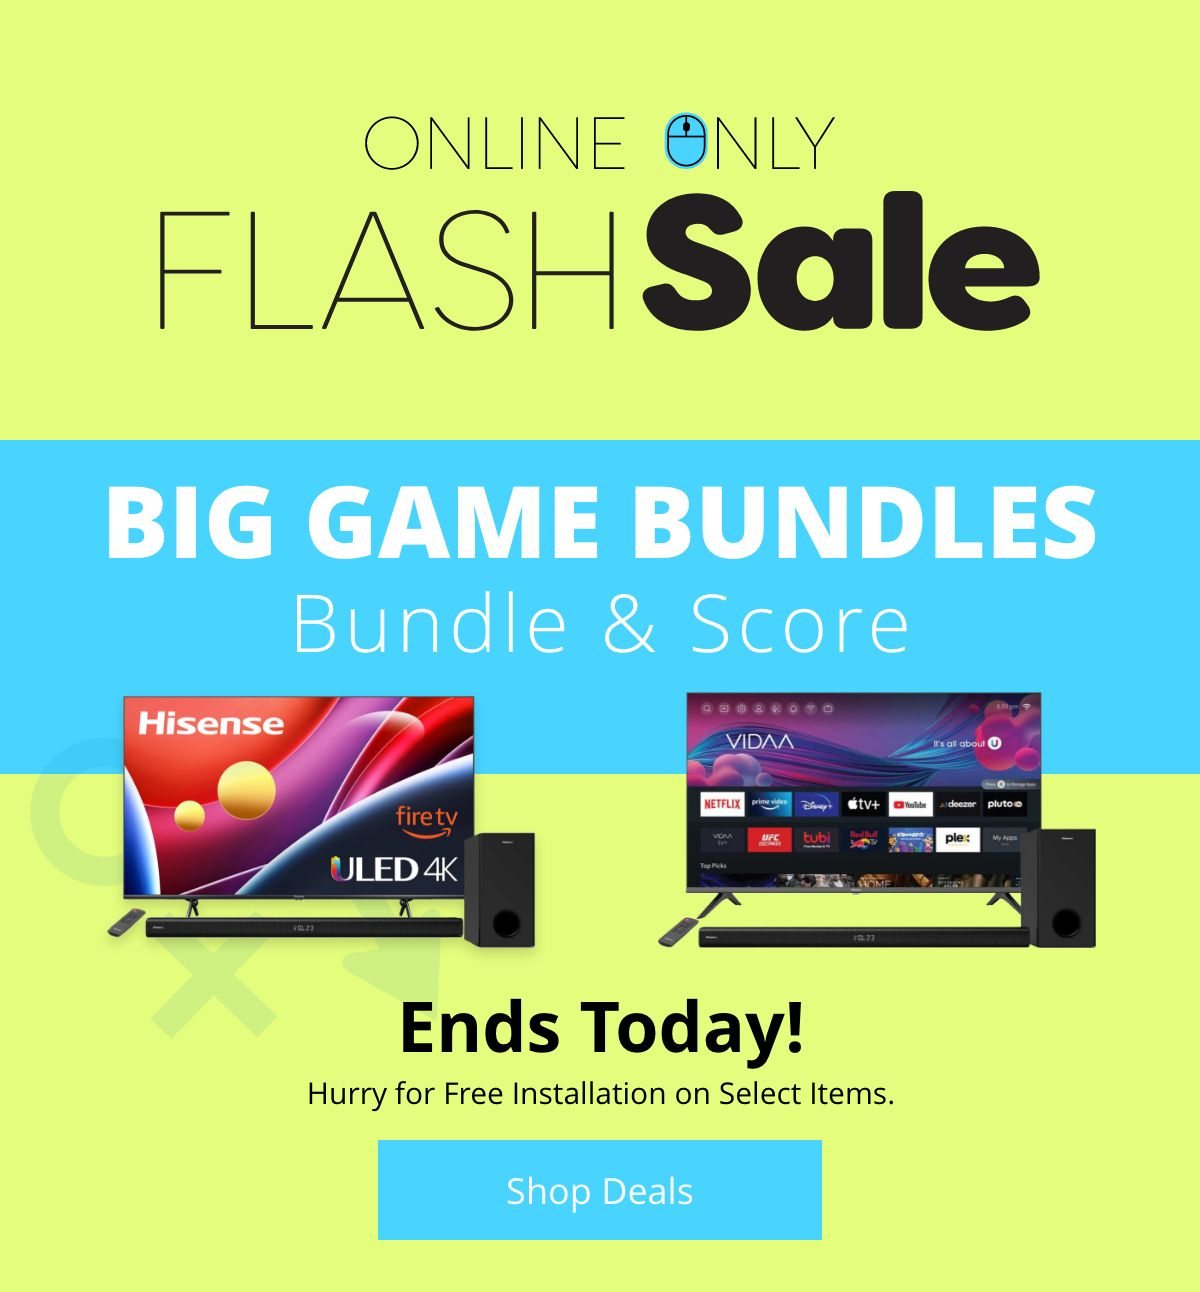 Big Game Bundles available online only